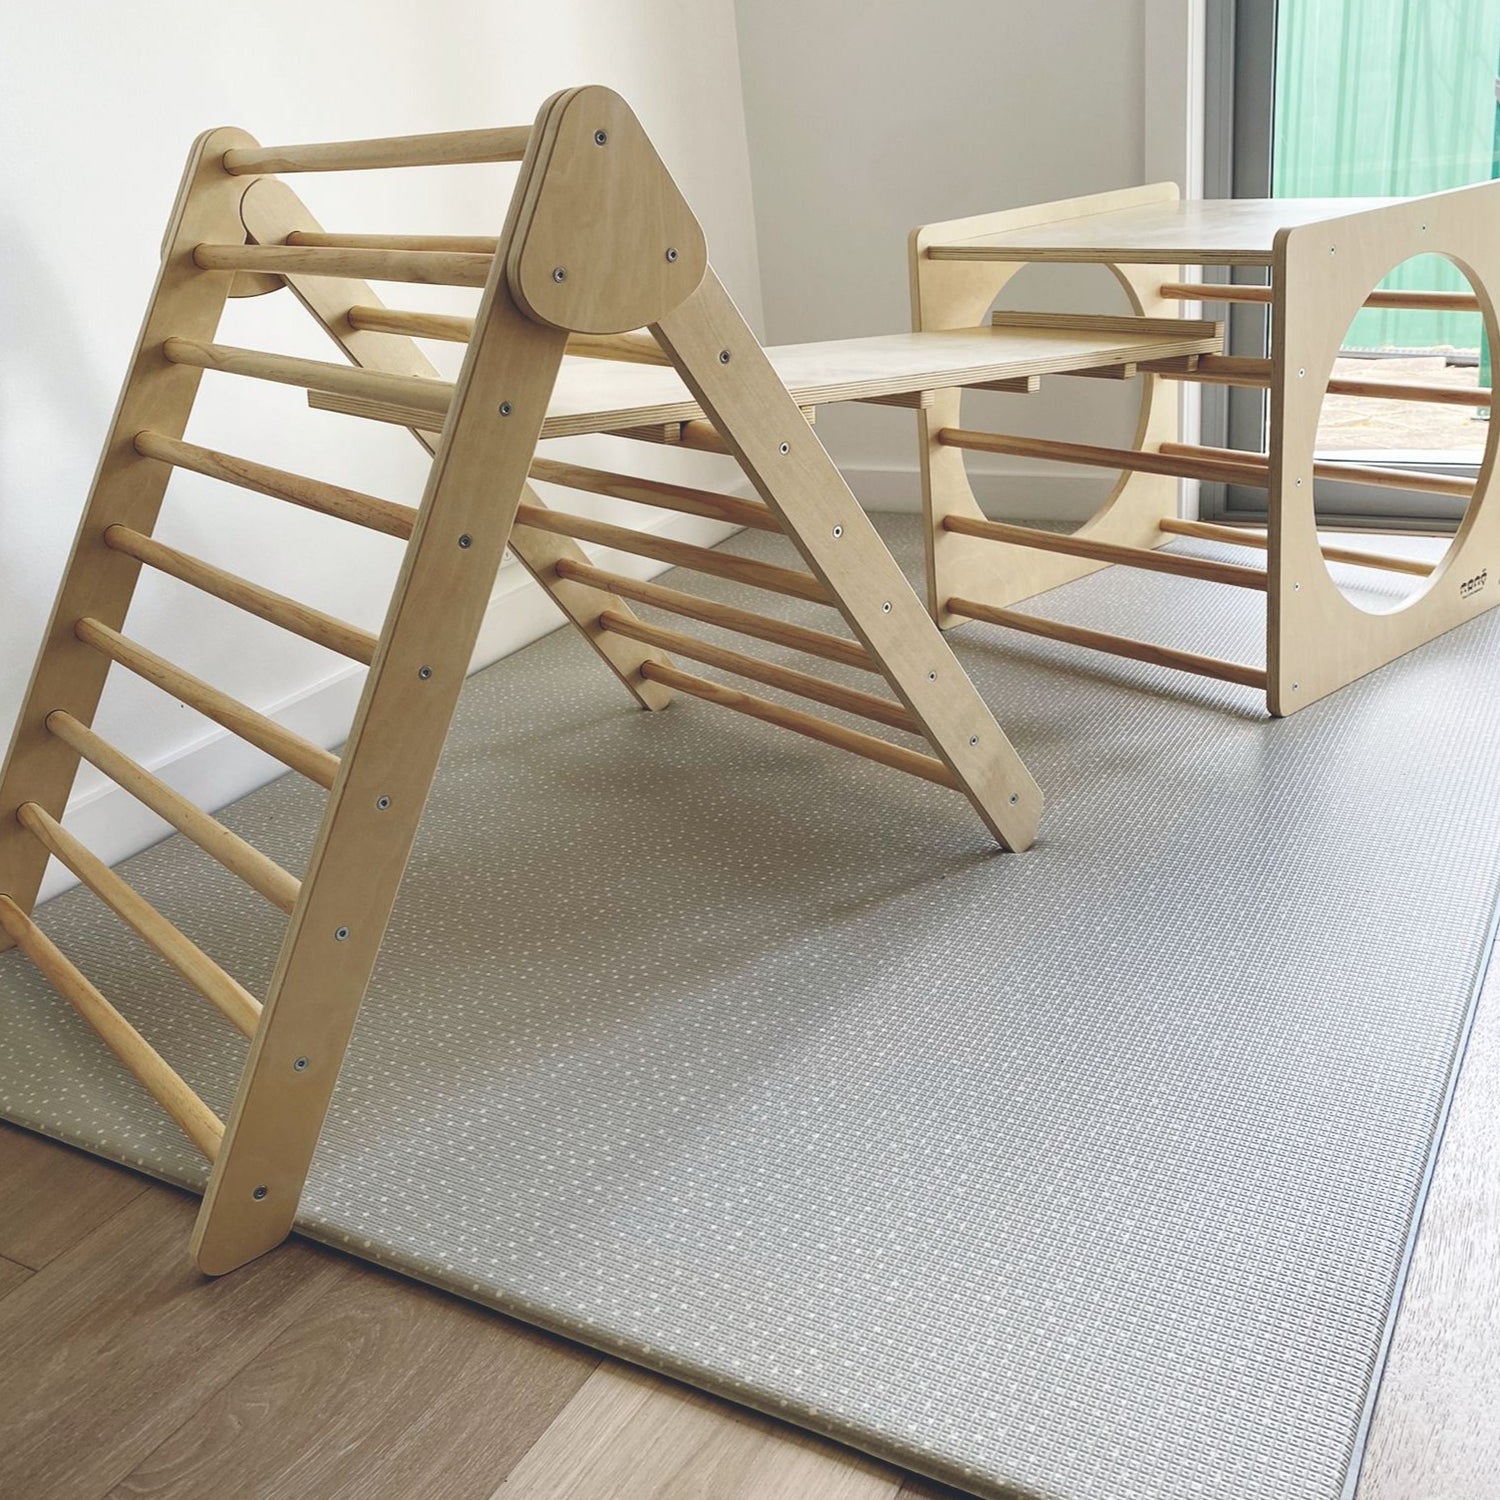 Image of a Pikler Triangle, Cube, and Ramp Bundle Set, showcasing the versatile play structures designed for developmental climbing and creative play for young children.